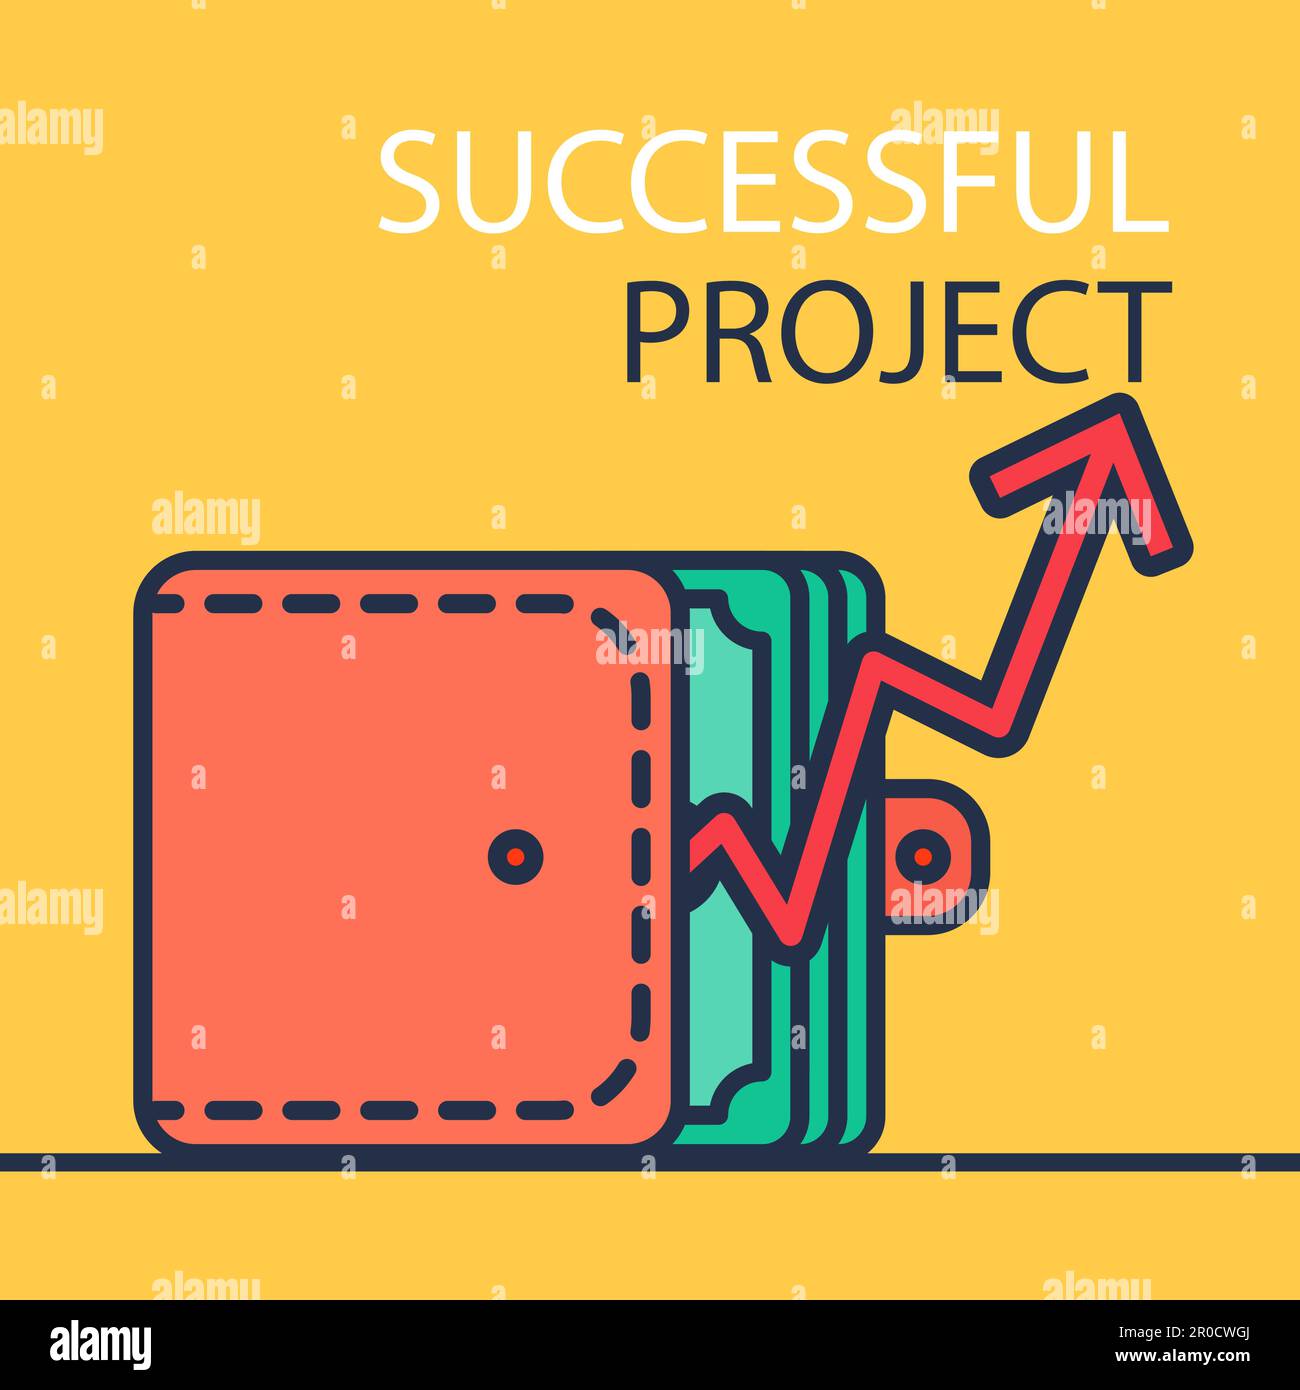 Successful investing concept. Bank holding. Financial budget banner. Money, purse and graph. Earnings and payments symbol. Patent illustration. Vector Stock Vector